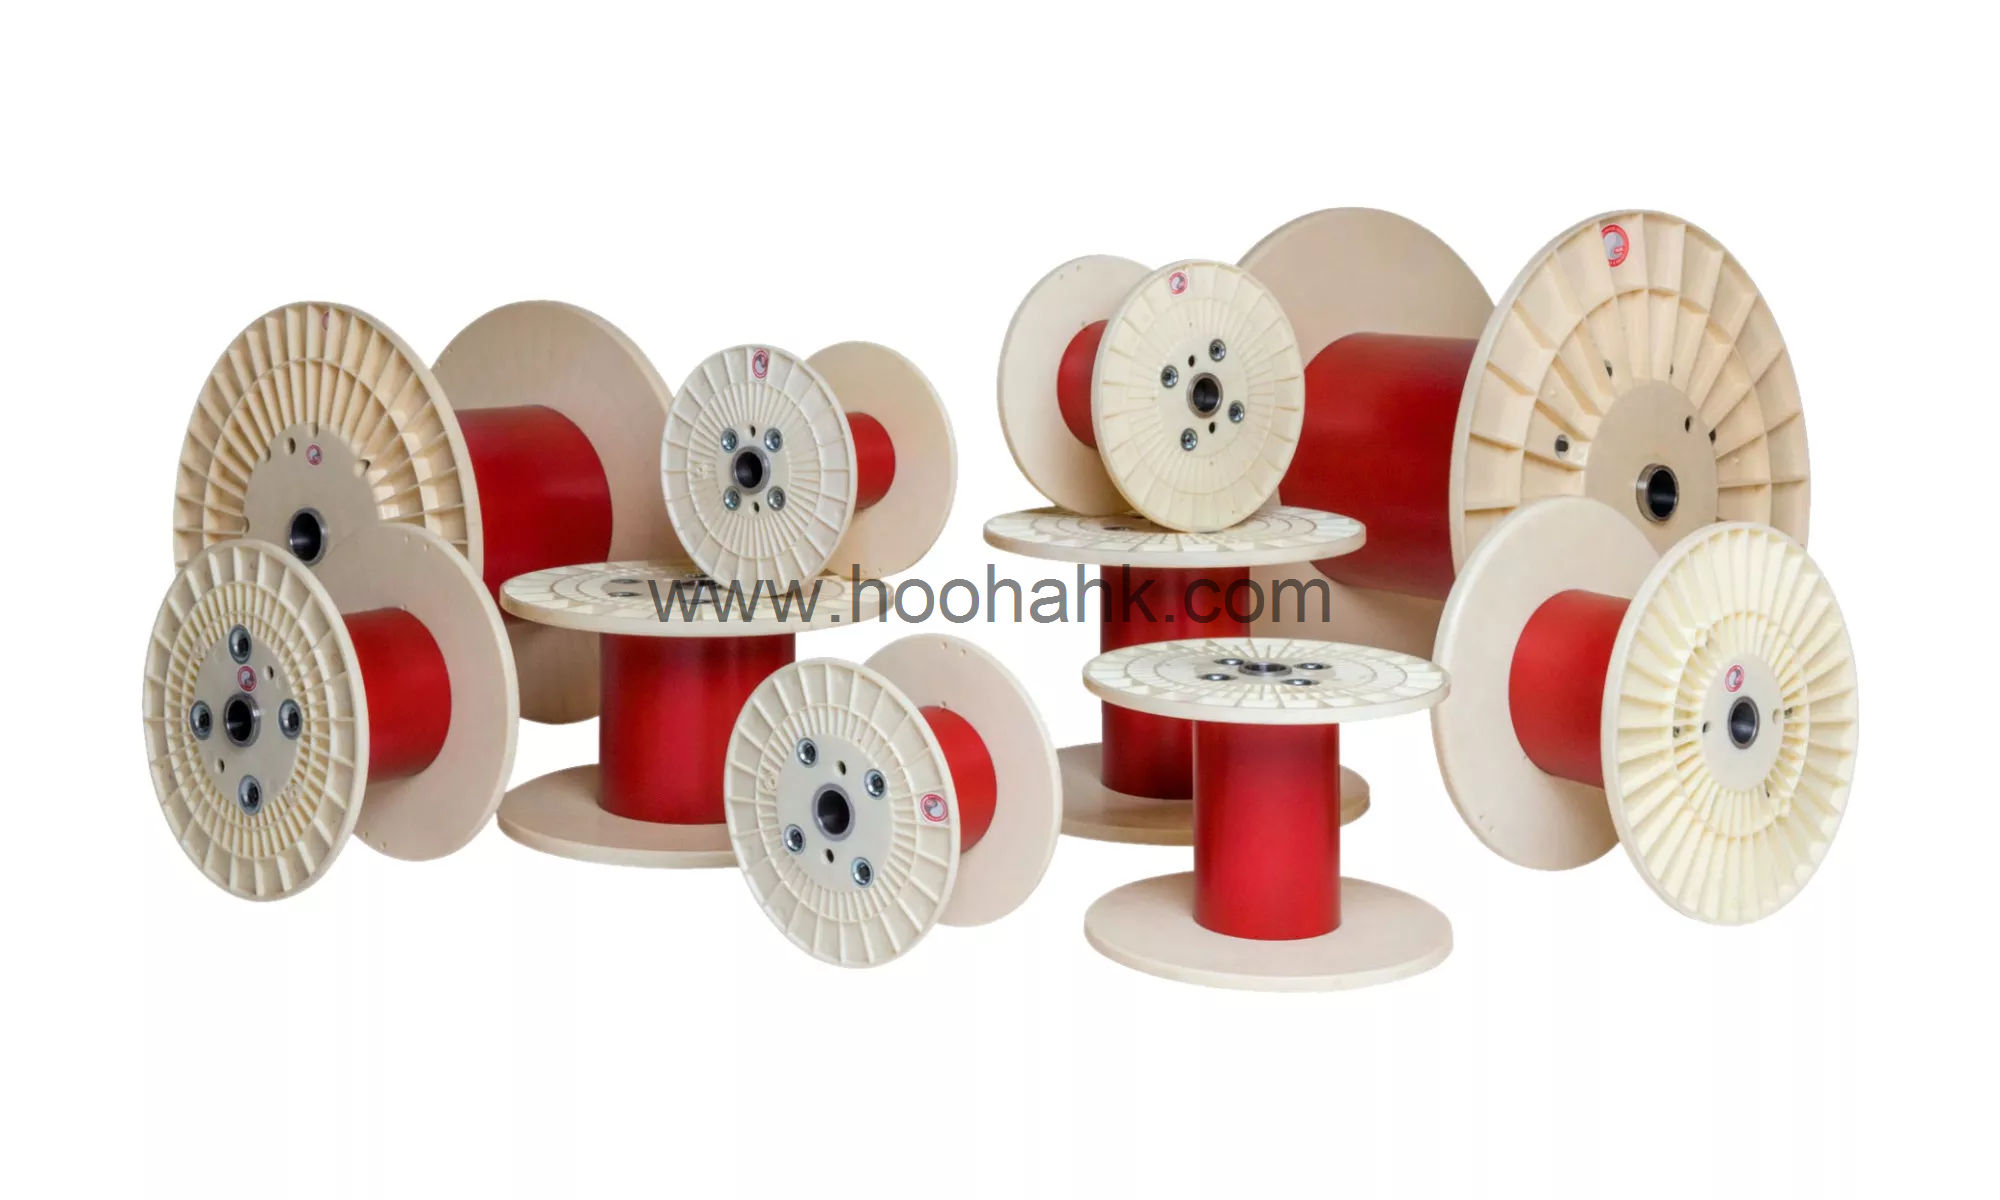 ABS plastic spool and bobbin wooden spool wooden bobbin ABS reel used in wire and cable making machine